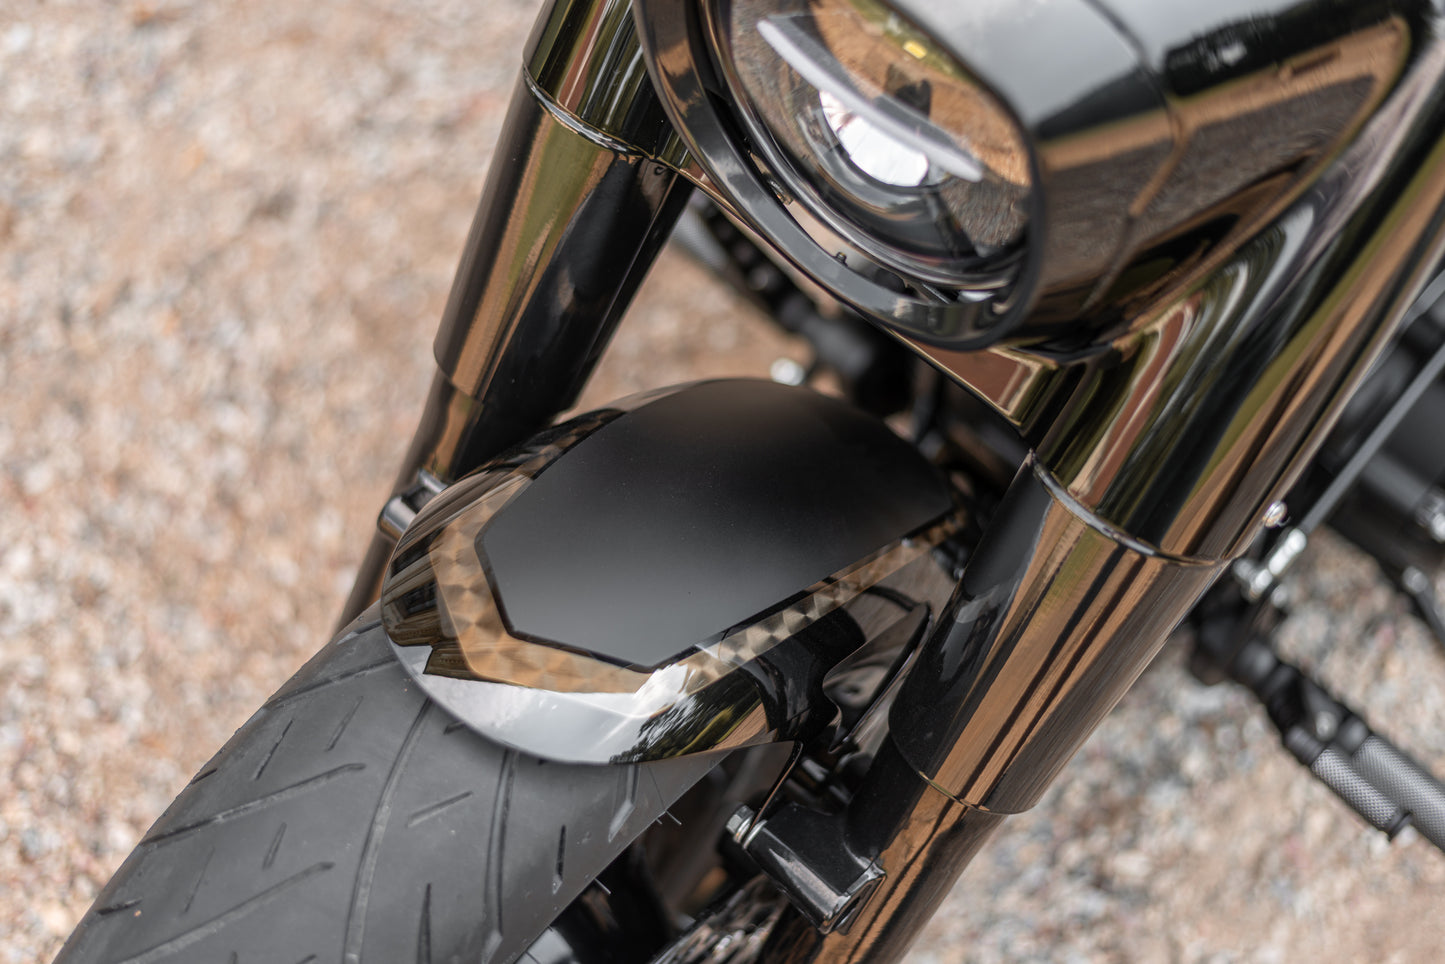 Zoomed  Harley Davidson motorcycle with Killer Custom parts from above blurred background